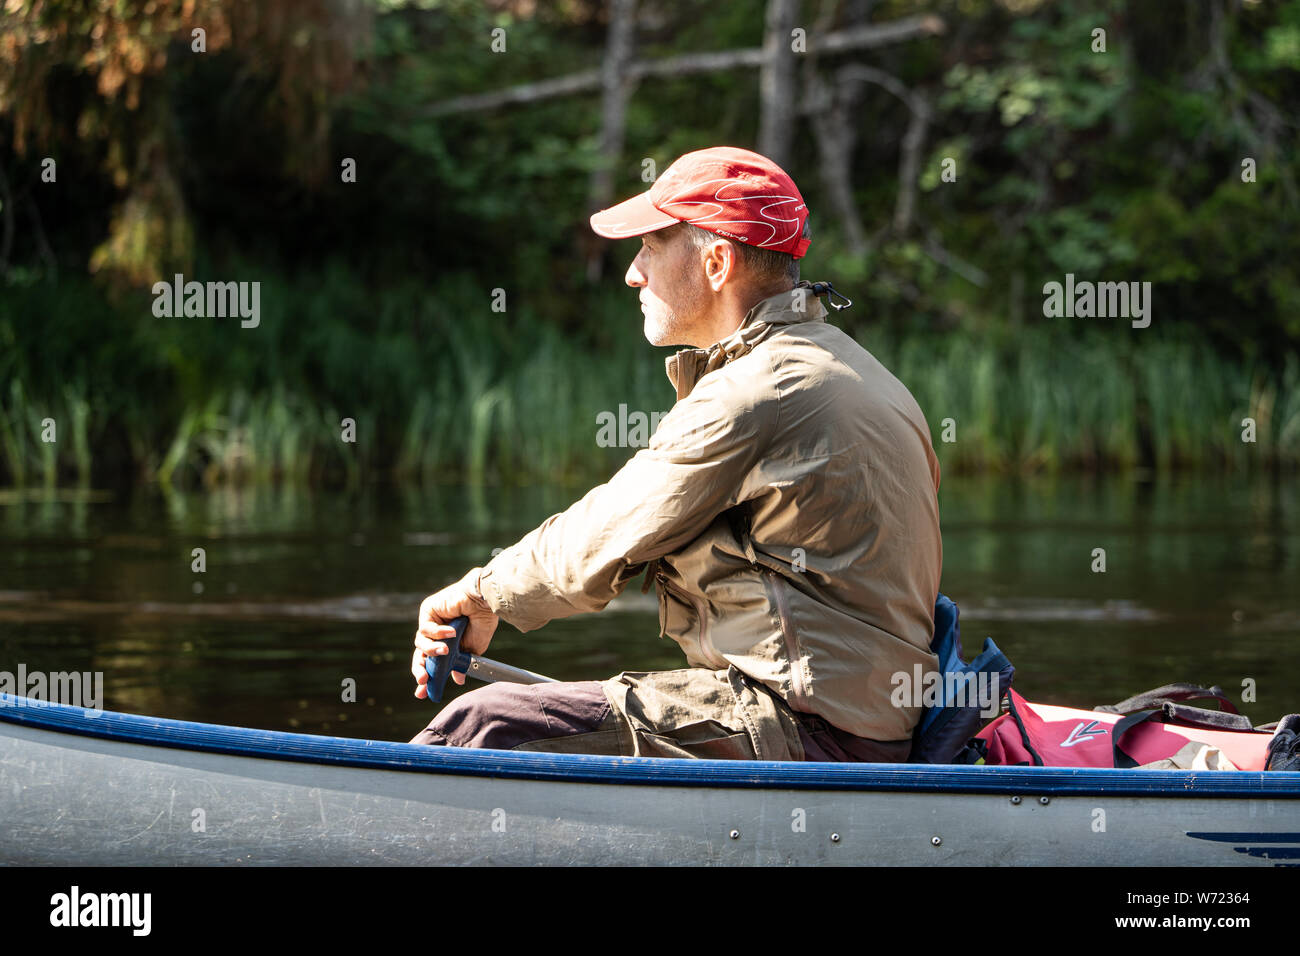 A man canoeing on the Black River (Svartälven) in the wilderness, Sweden Stock Photo